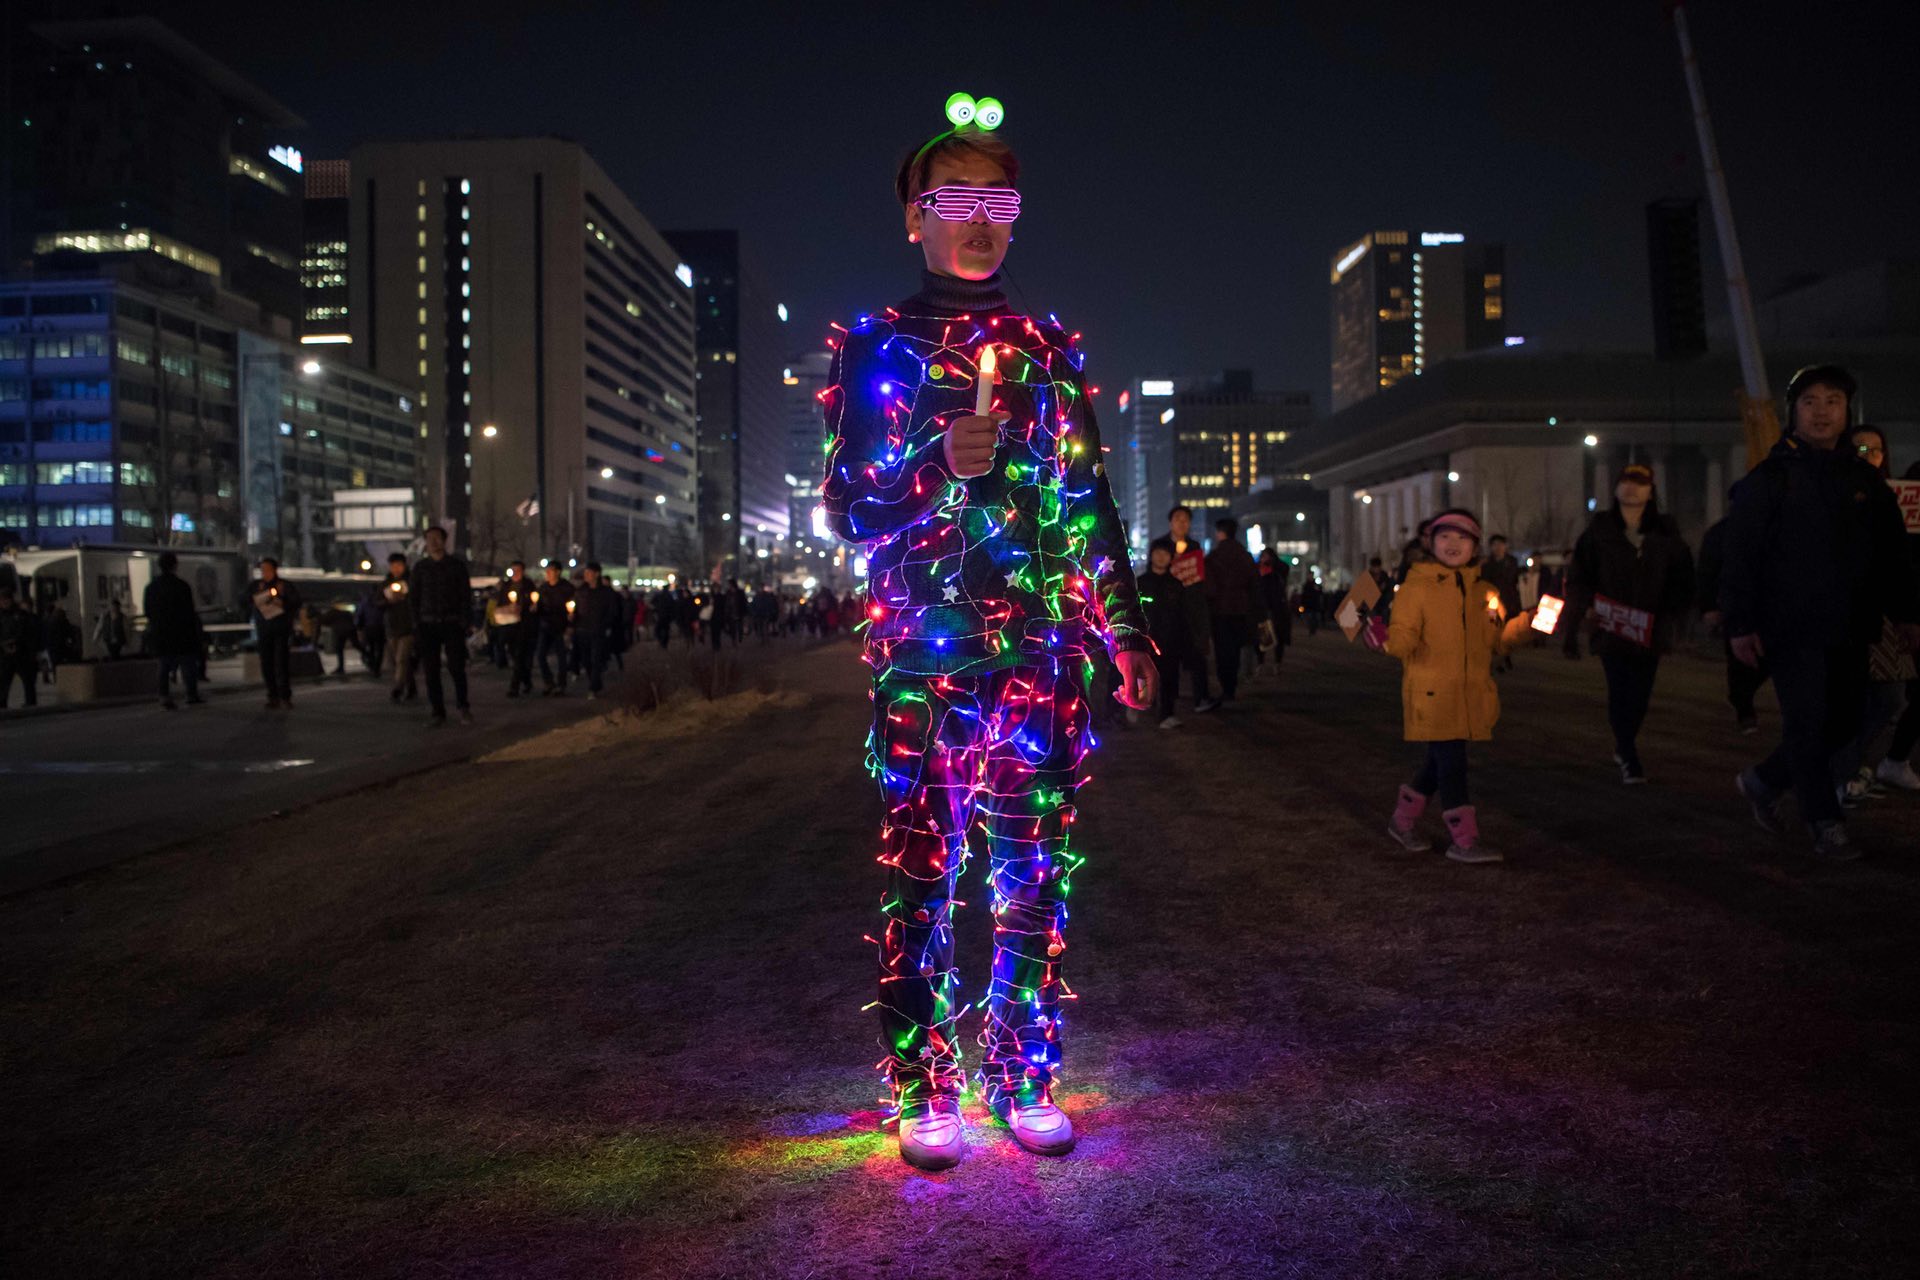 An anti-government protester wearing an illuminated costume takes part in a rally, Seoul, South Korea. PHOTO: AFP